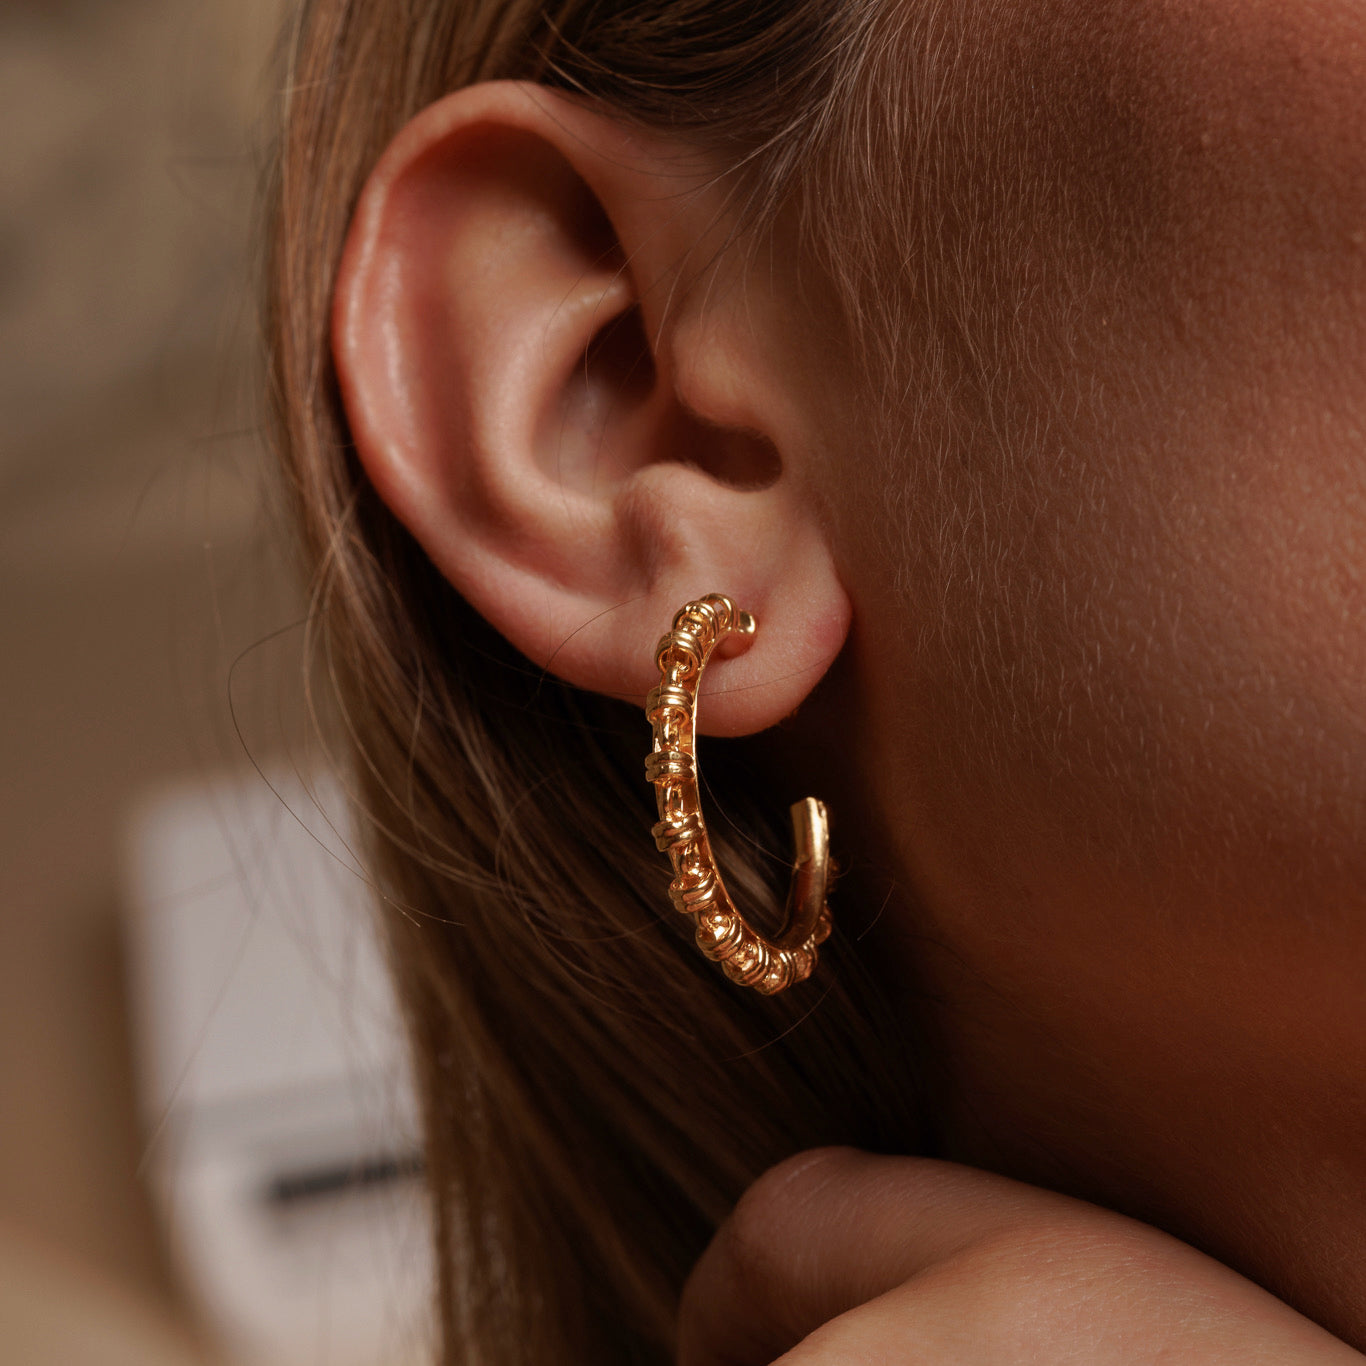 A closeup, side view of a model wearing large gold hoop earrings with a chain design from DelBrenna Italian jewelry design. The earrings are hand-crafted in Tuscany. 